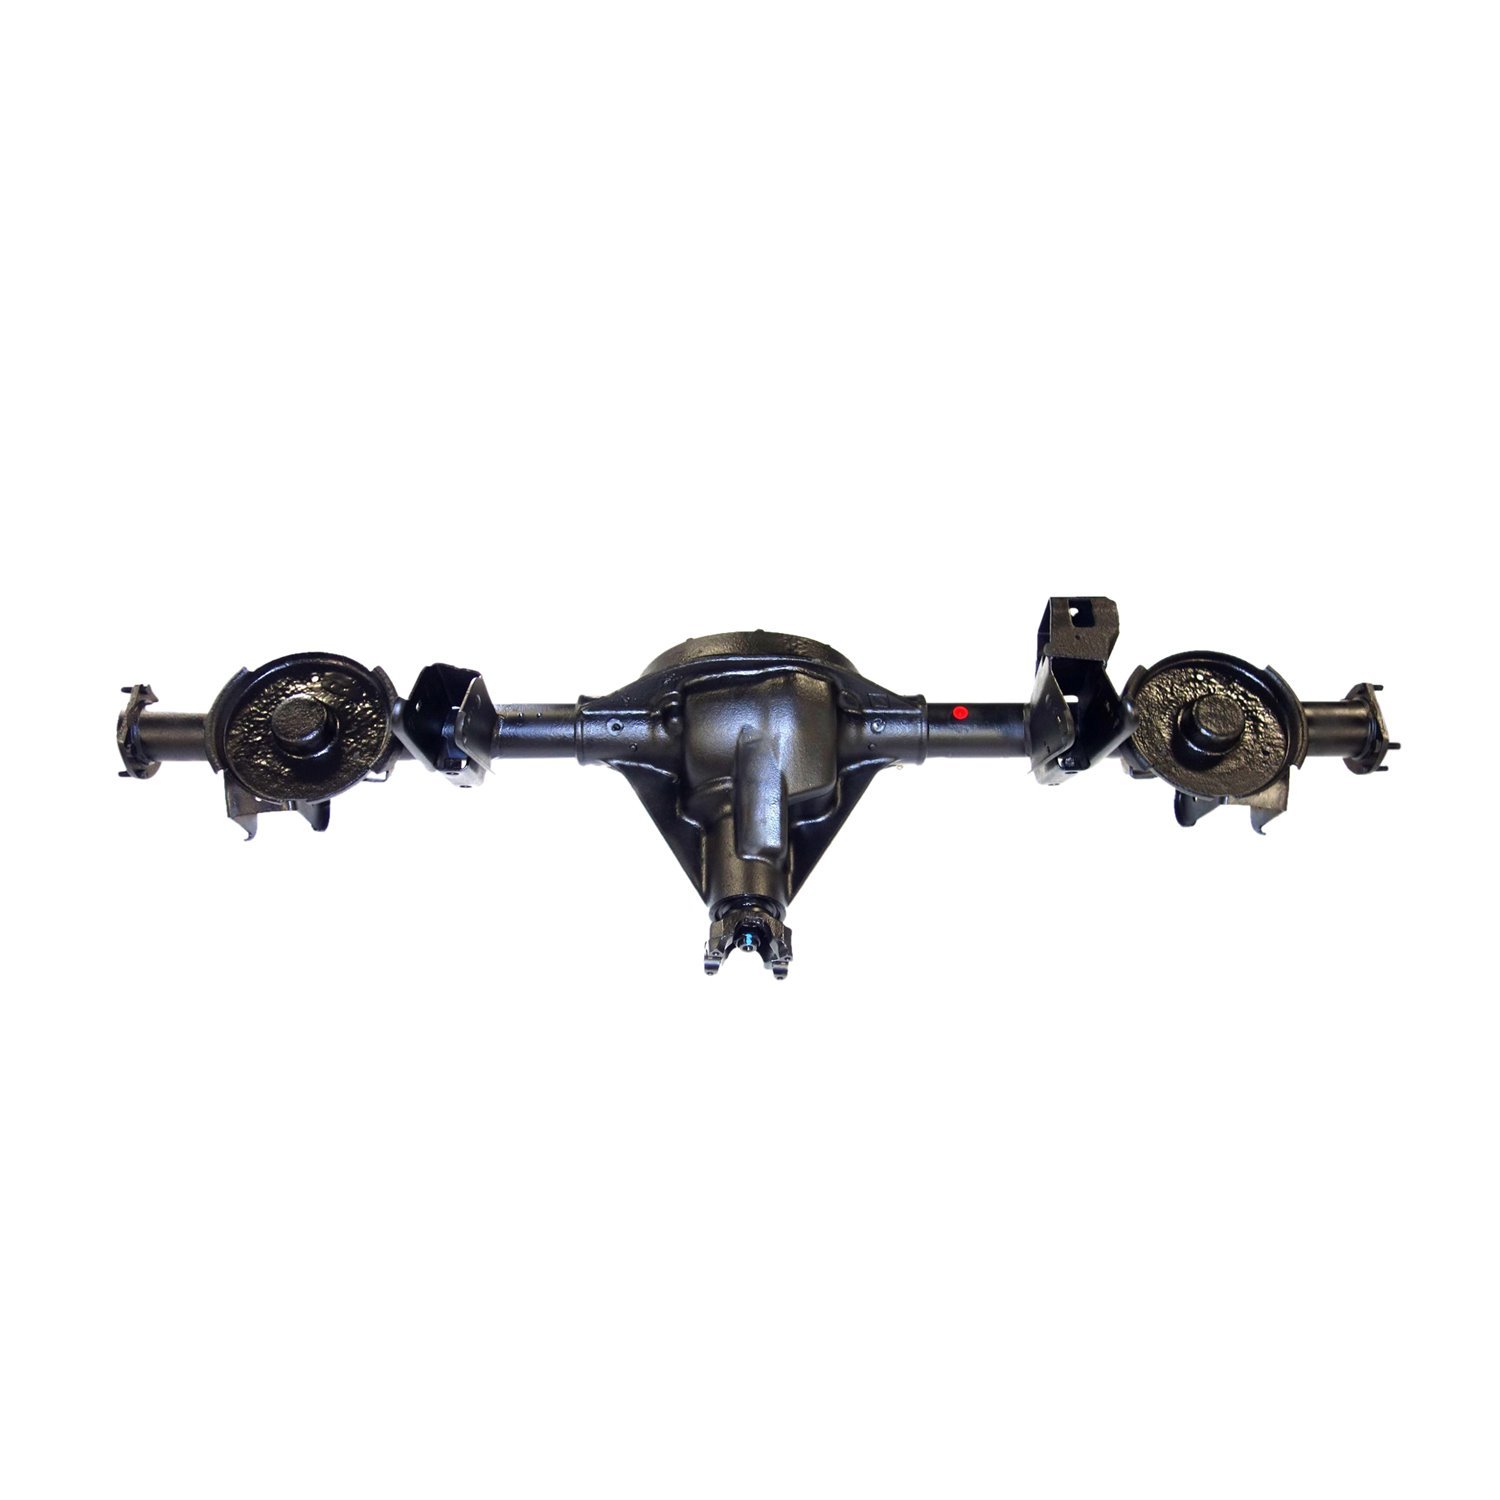 Remanufactured Complete Rear Axle Assy D35 1997-2002 Wrangler 3.73 ABS